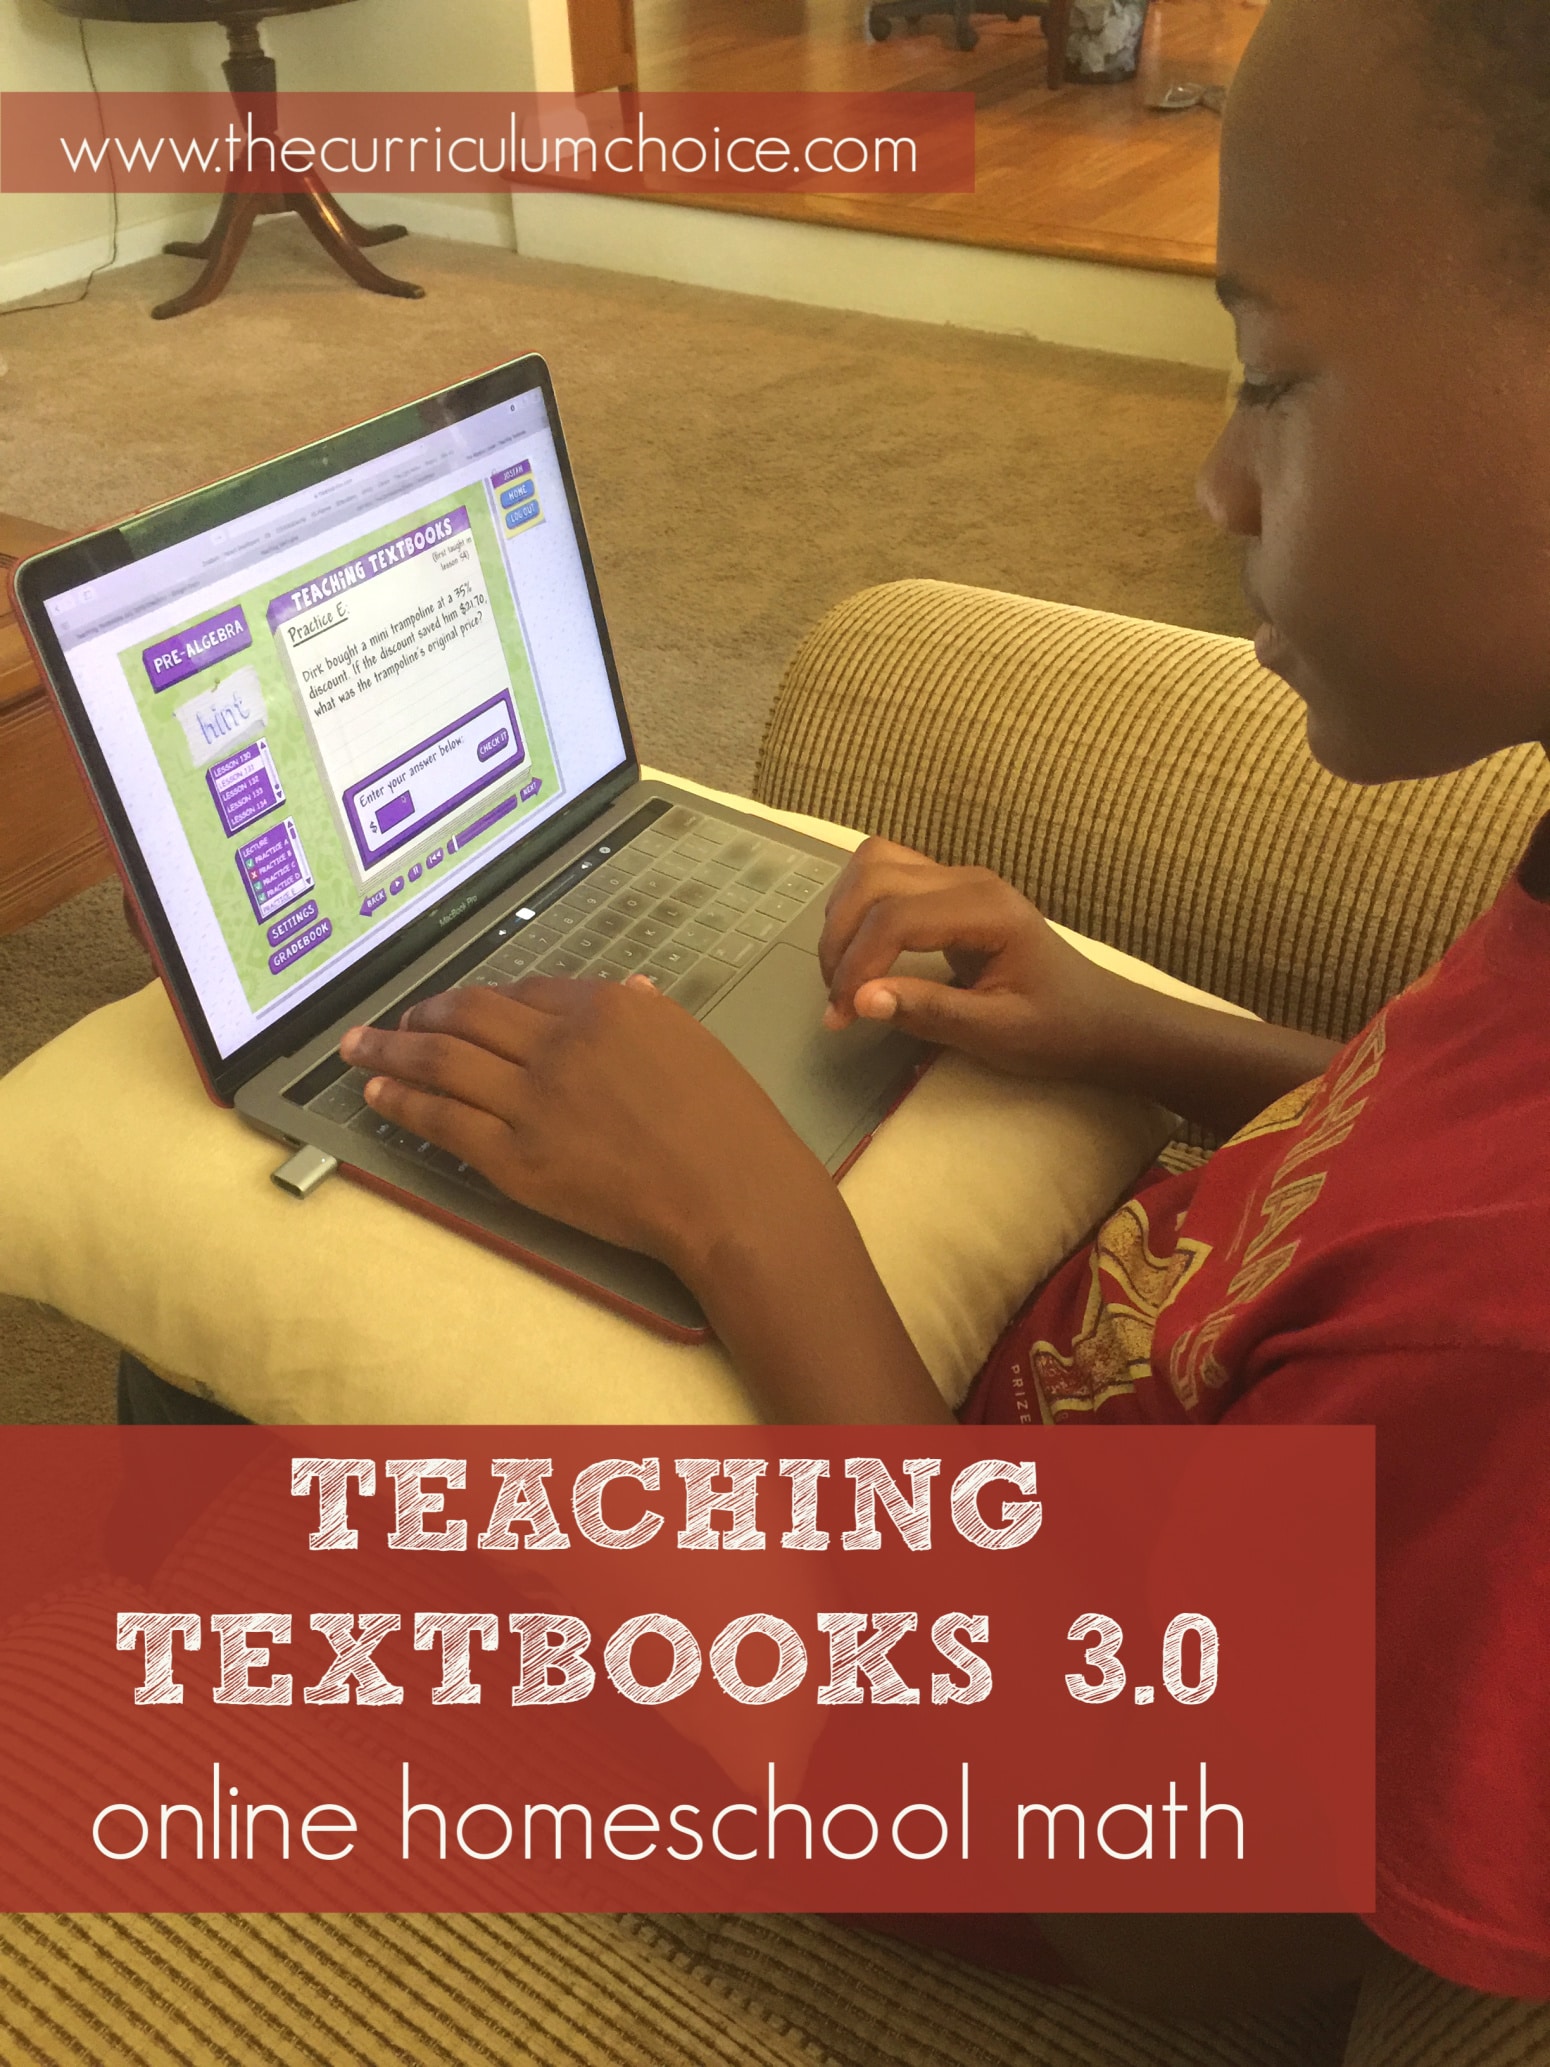 Online Homeschool Math Curriculum! Teaching Textbooks’s solid reputation among homeschool families has a long history. What is NEW to their math approach is Teaching Textbooks 3.0 — a fully online curriculum with option to print lessons.